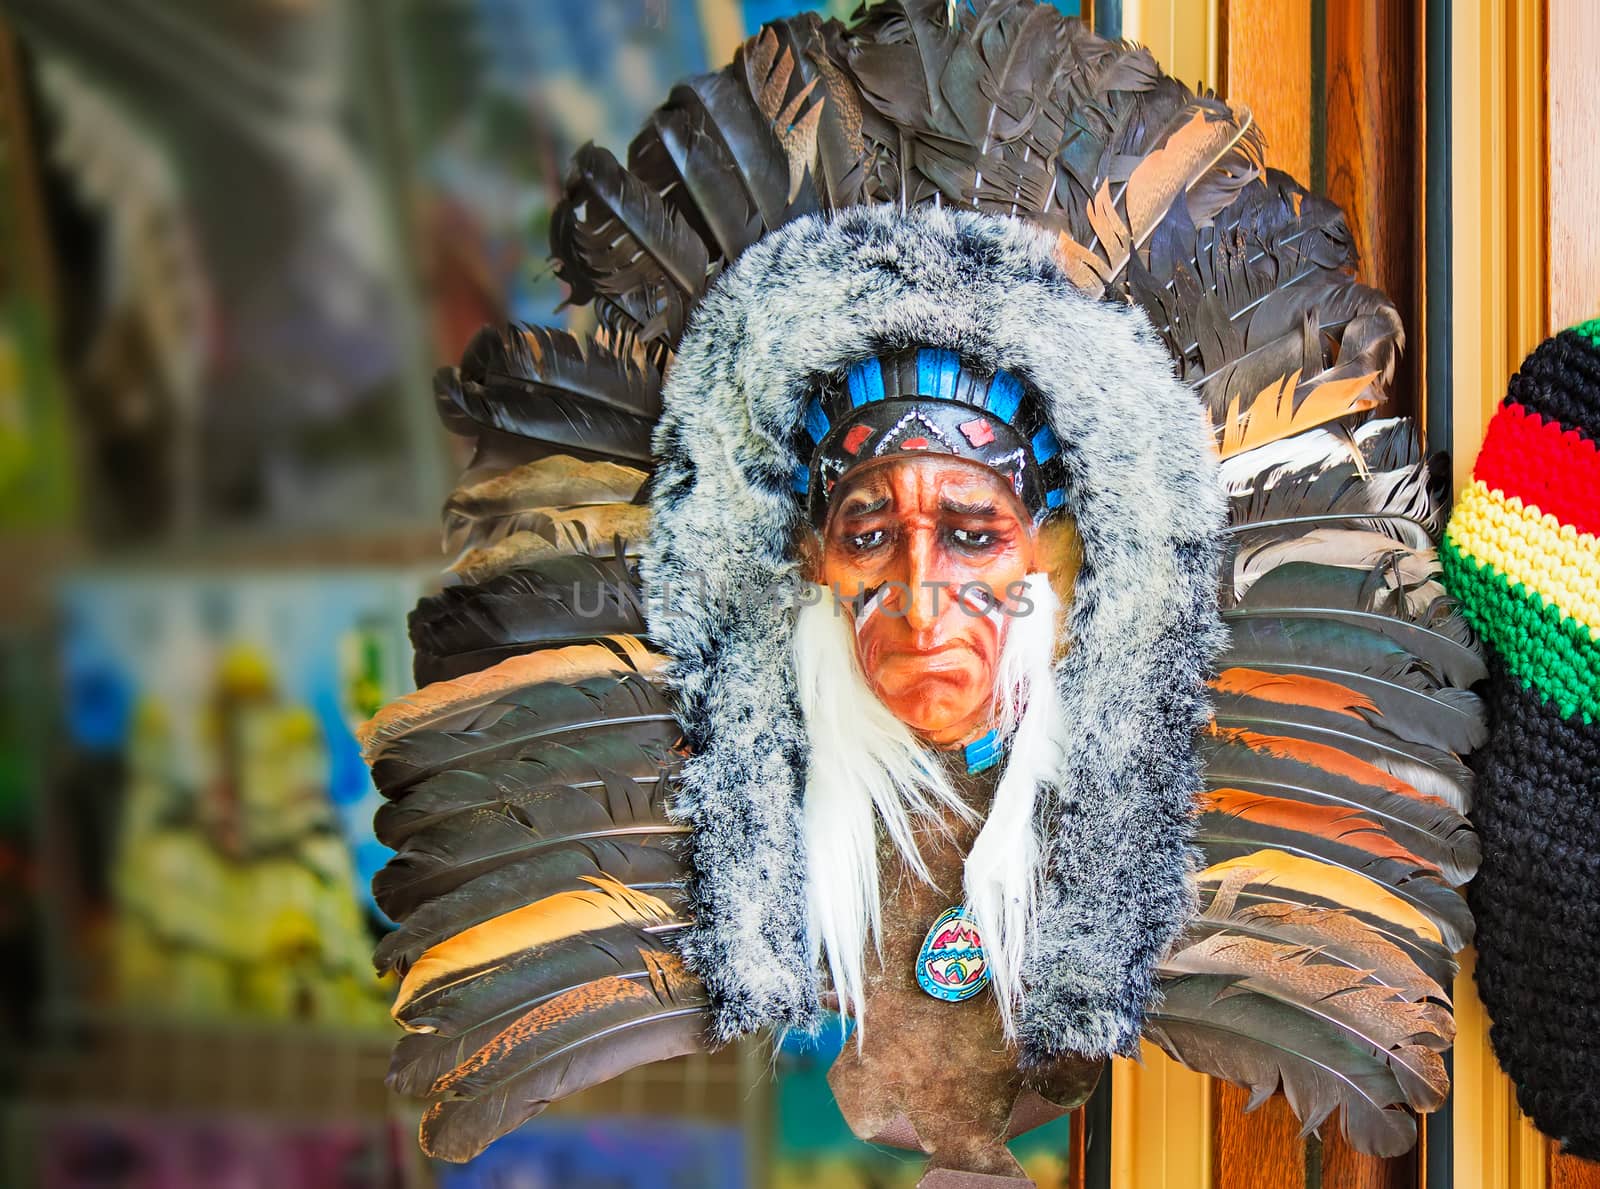 On the shop front is colorful souvenir: a beautiful mask Indians, decorated with fur and feathers.